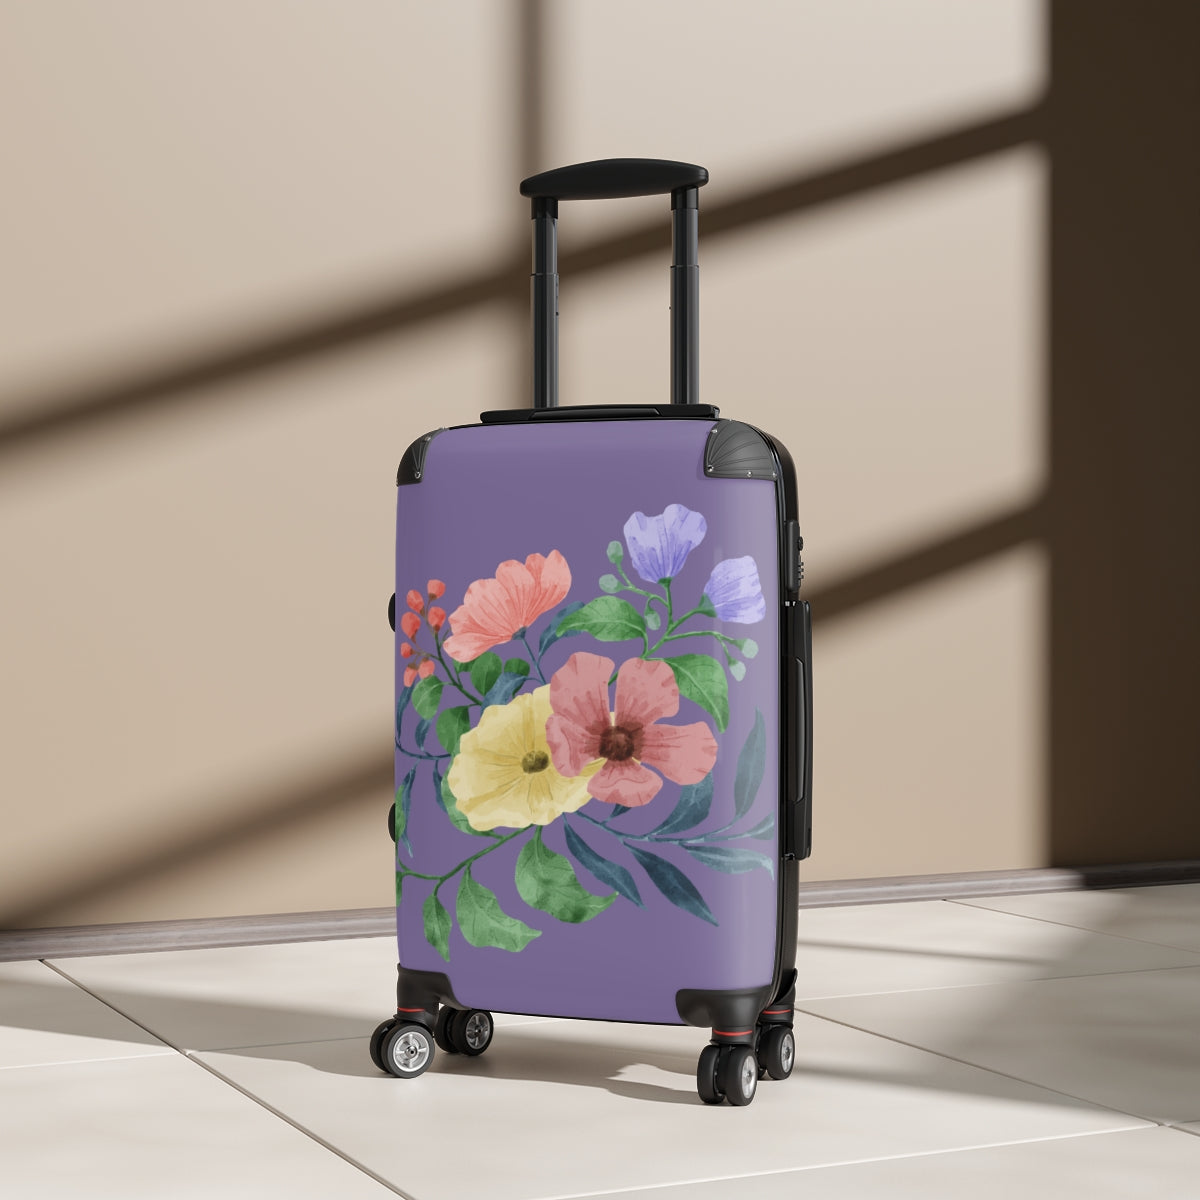 PURPLE FLORAL SUITCASE SET Artzira, Cabin Suitcase Carry-On Luggage, Trolly Travel Bags Double Wheeled Spinners, Women's Choice, Bridal Gift